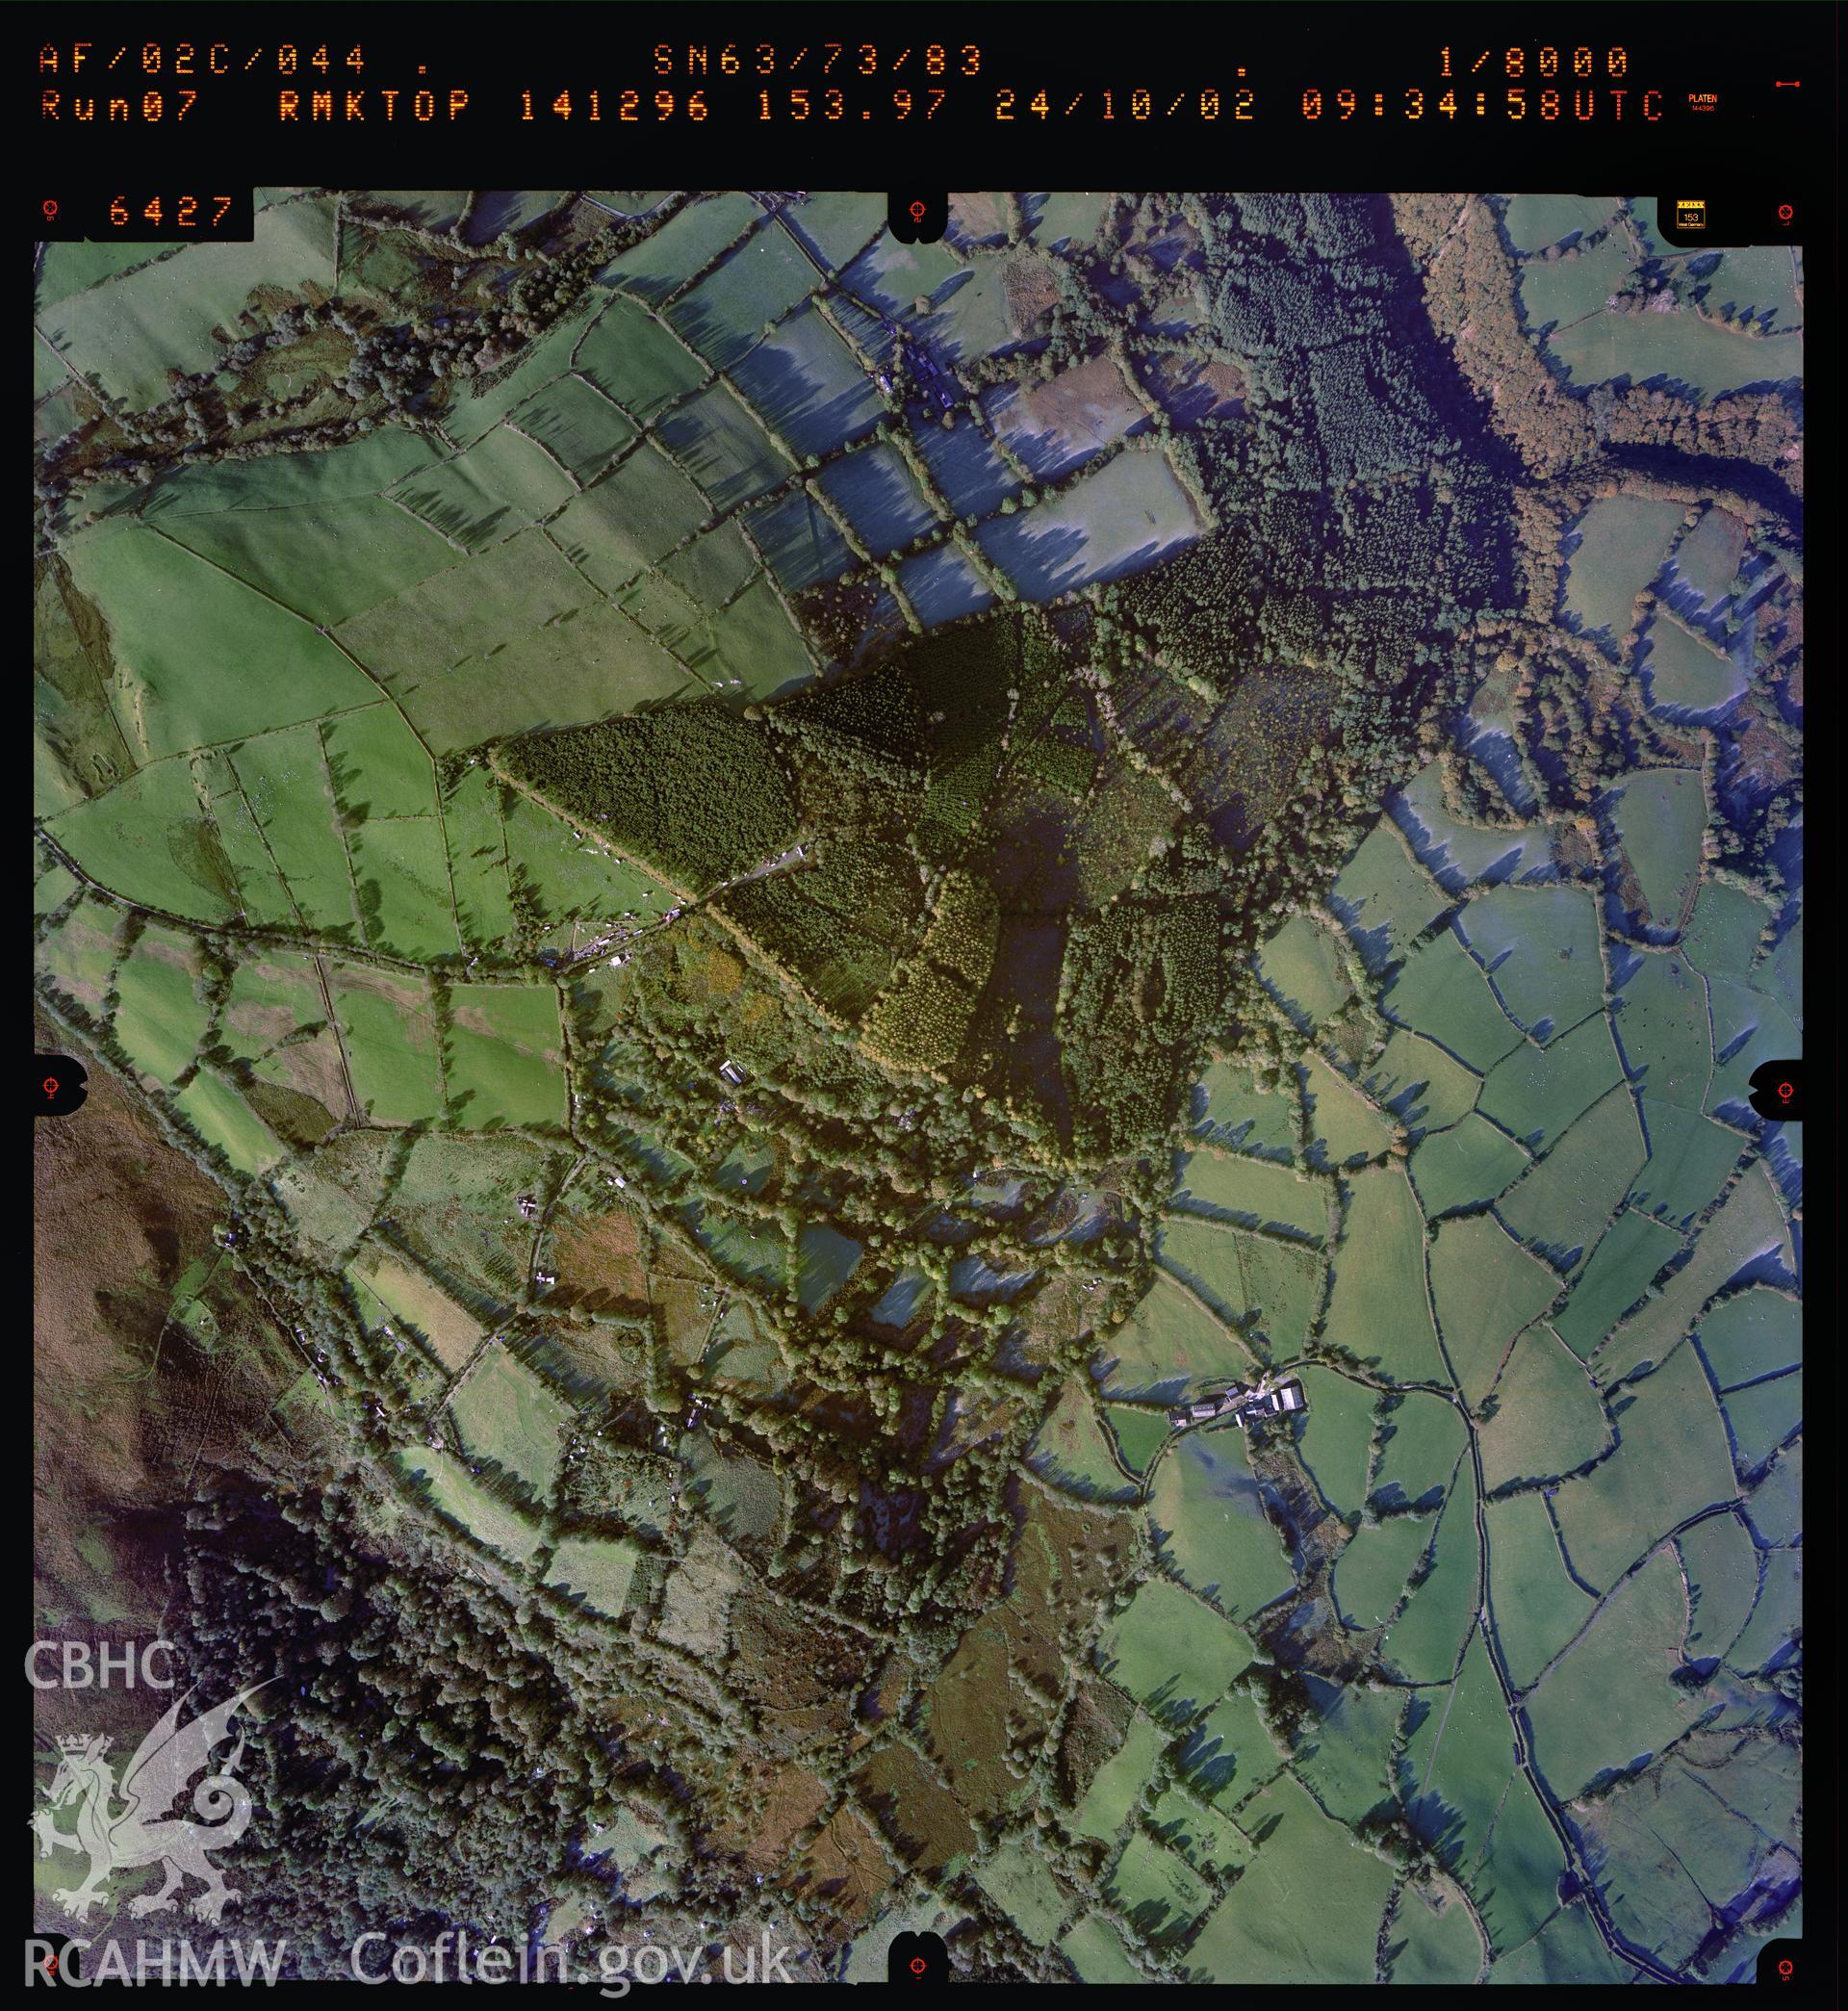 Digitized copy of a colour aerial photograph showing the Marchoglwyn area, Carmarthen, taken by Ordnance Survey, 2002.